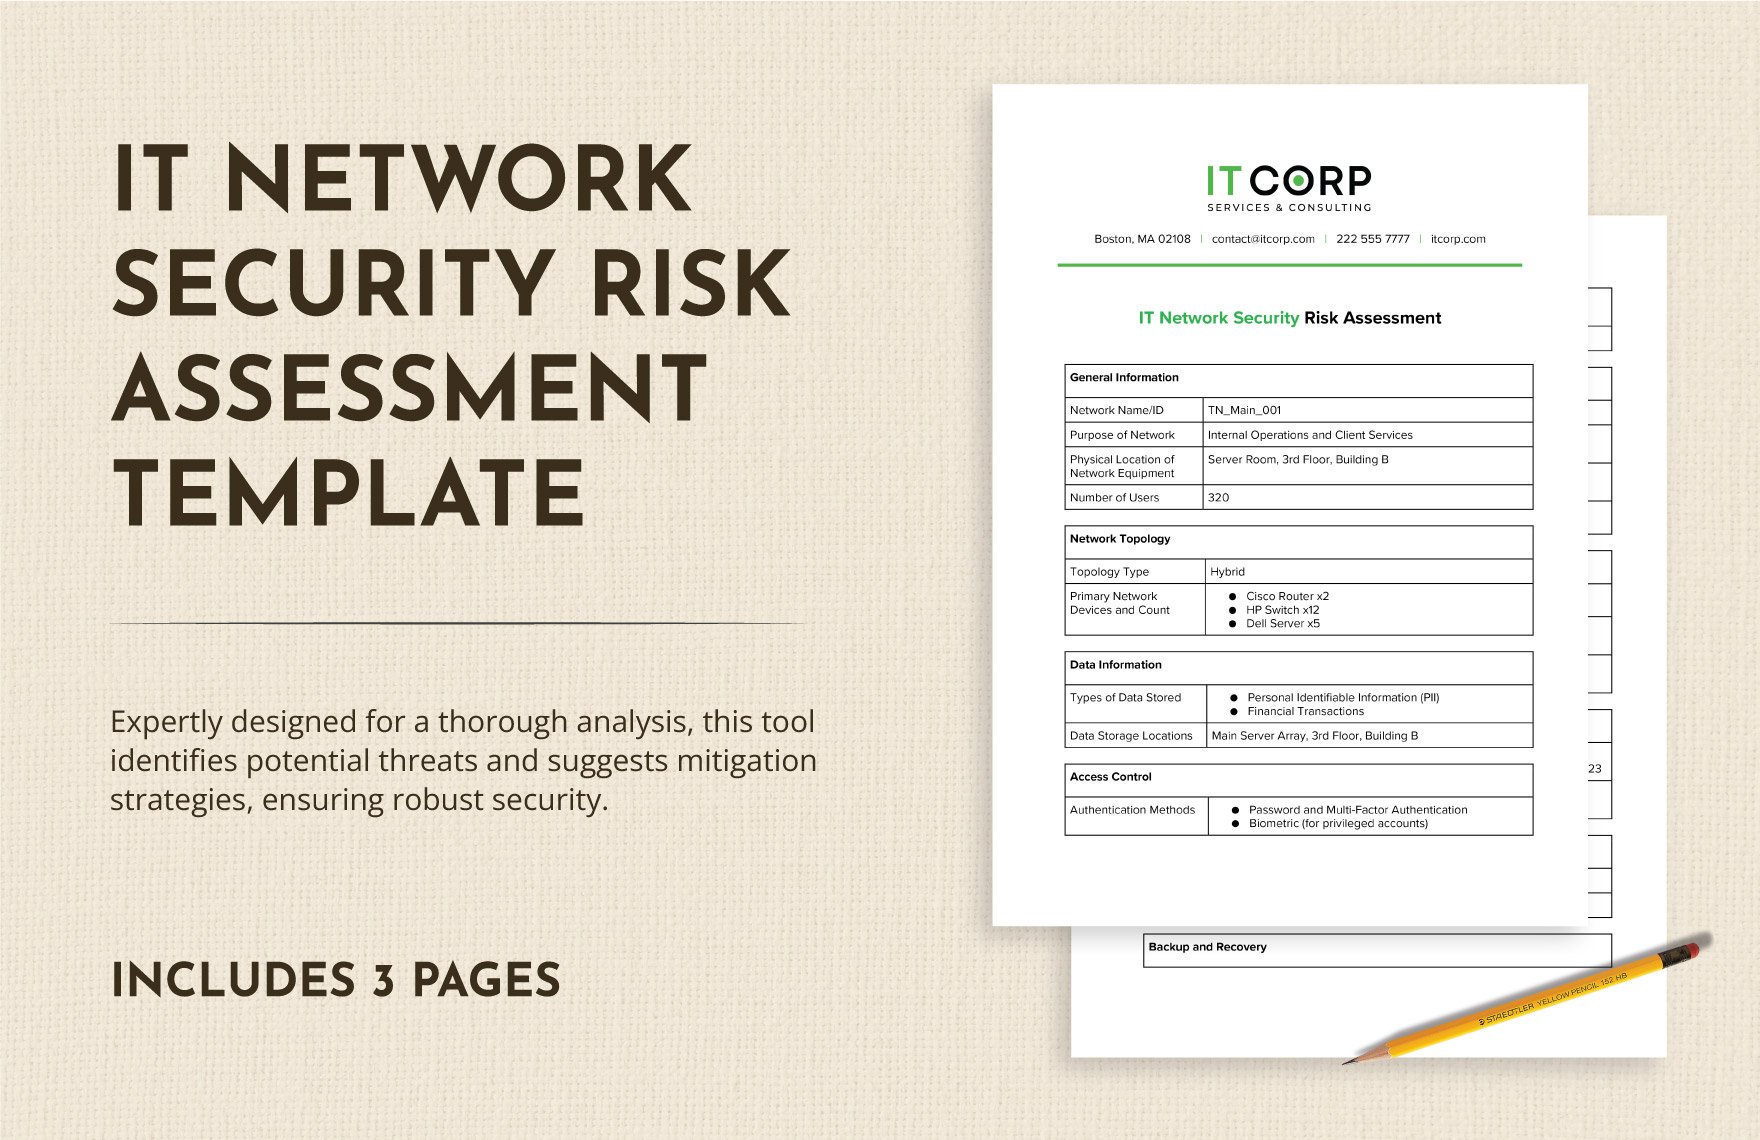 IT Network Security Risk Assessment Template in Word, Google Docs, PDF